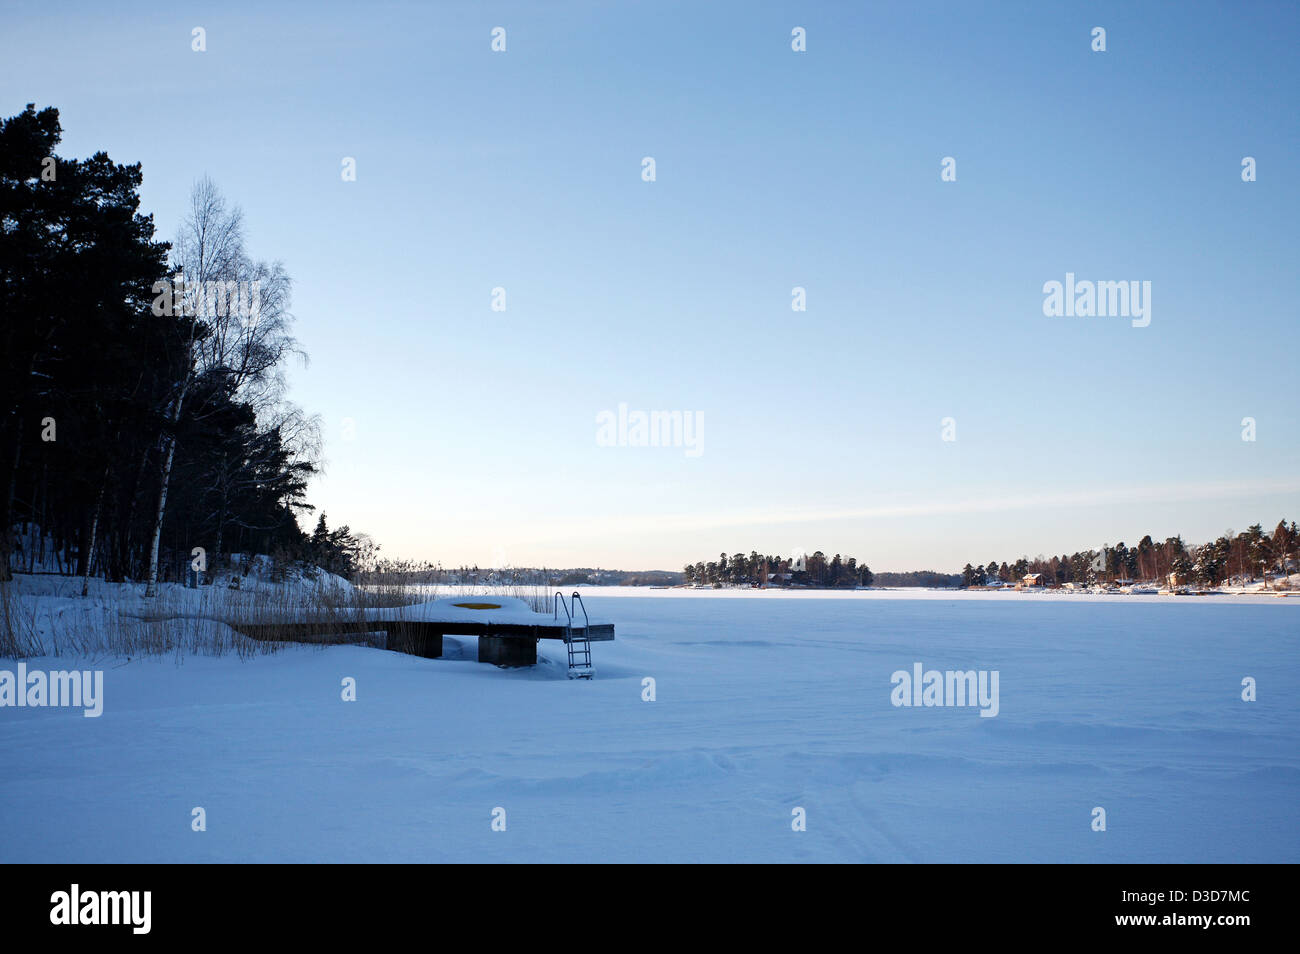 Dill, Sweden, a dock on the shore of a lake near the settlement Trolldalen Stock Photo